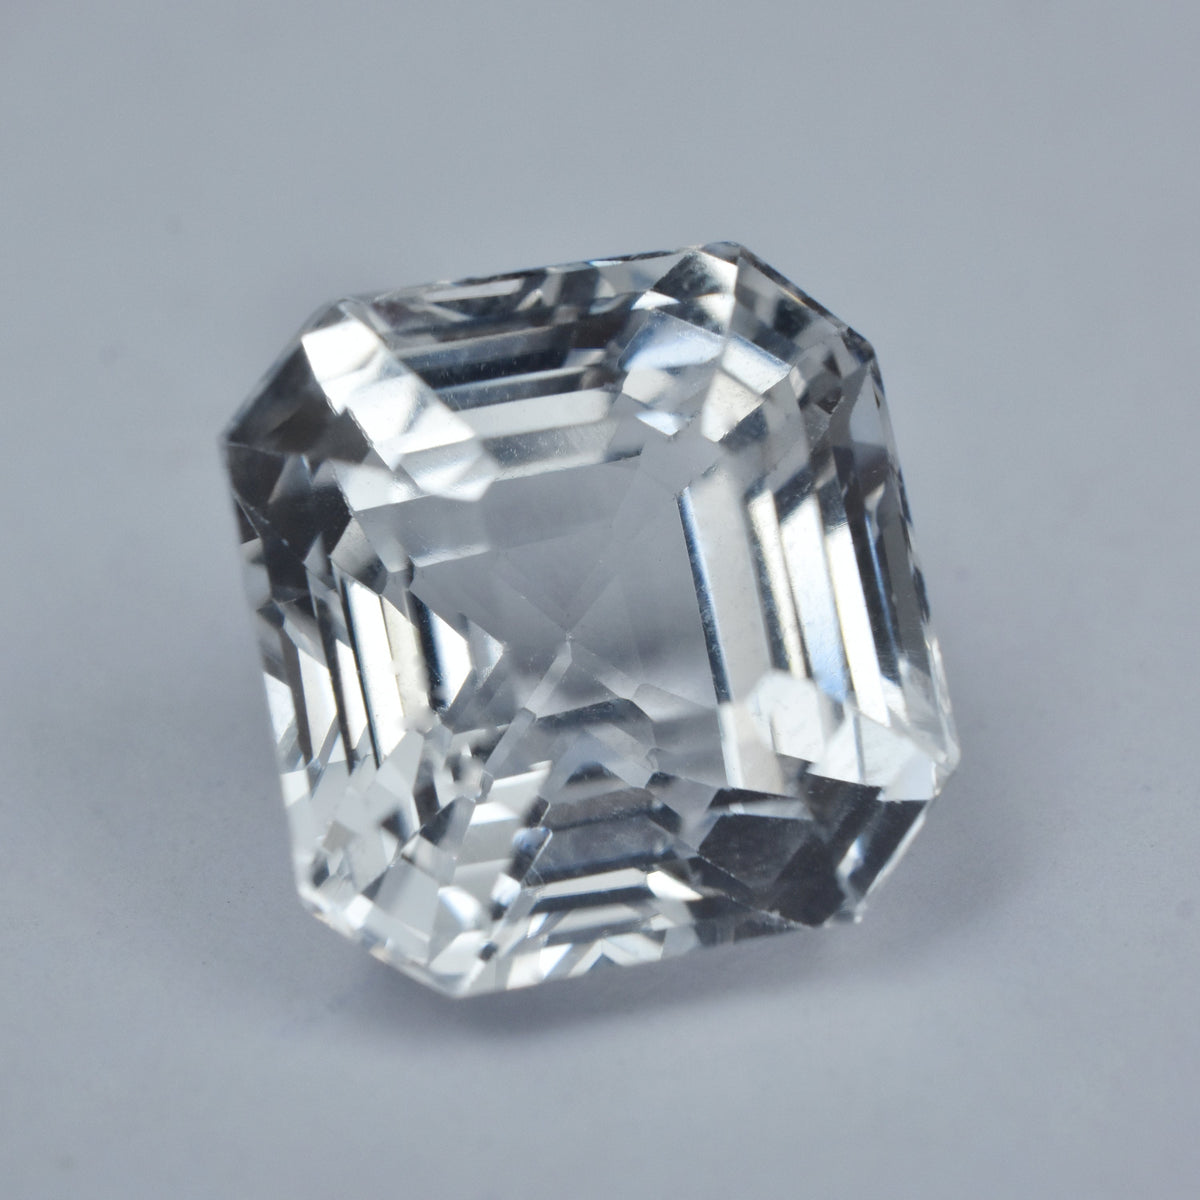 Sri Lanka's White Natural Sapphire 10.55 Carat Emerald Cut Loose Gemstone Certified | Free Delivery Free Gift | Gift For Mother/Wife